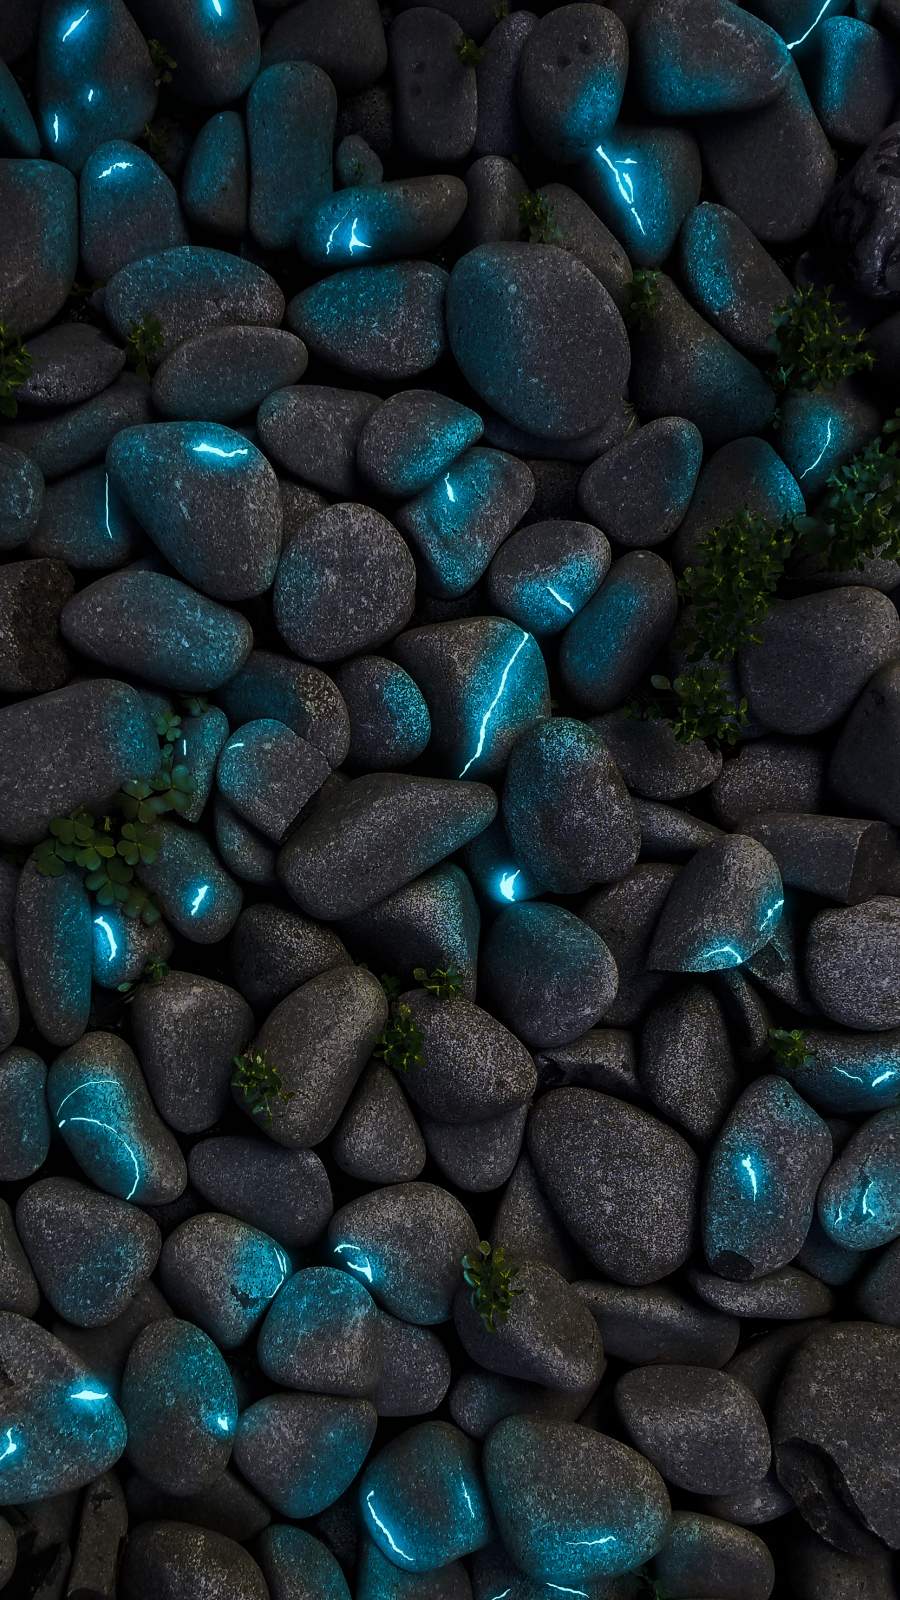 Neon Stone Pebbles - IPhone Wallpapers : iPhone Wallpapers